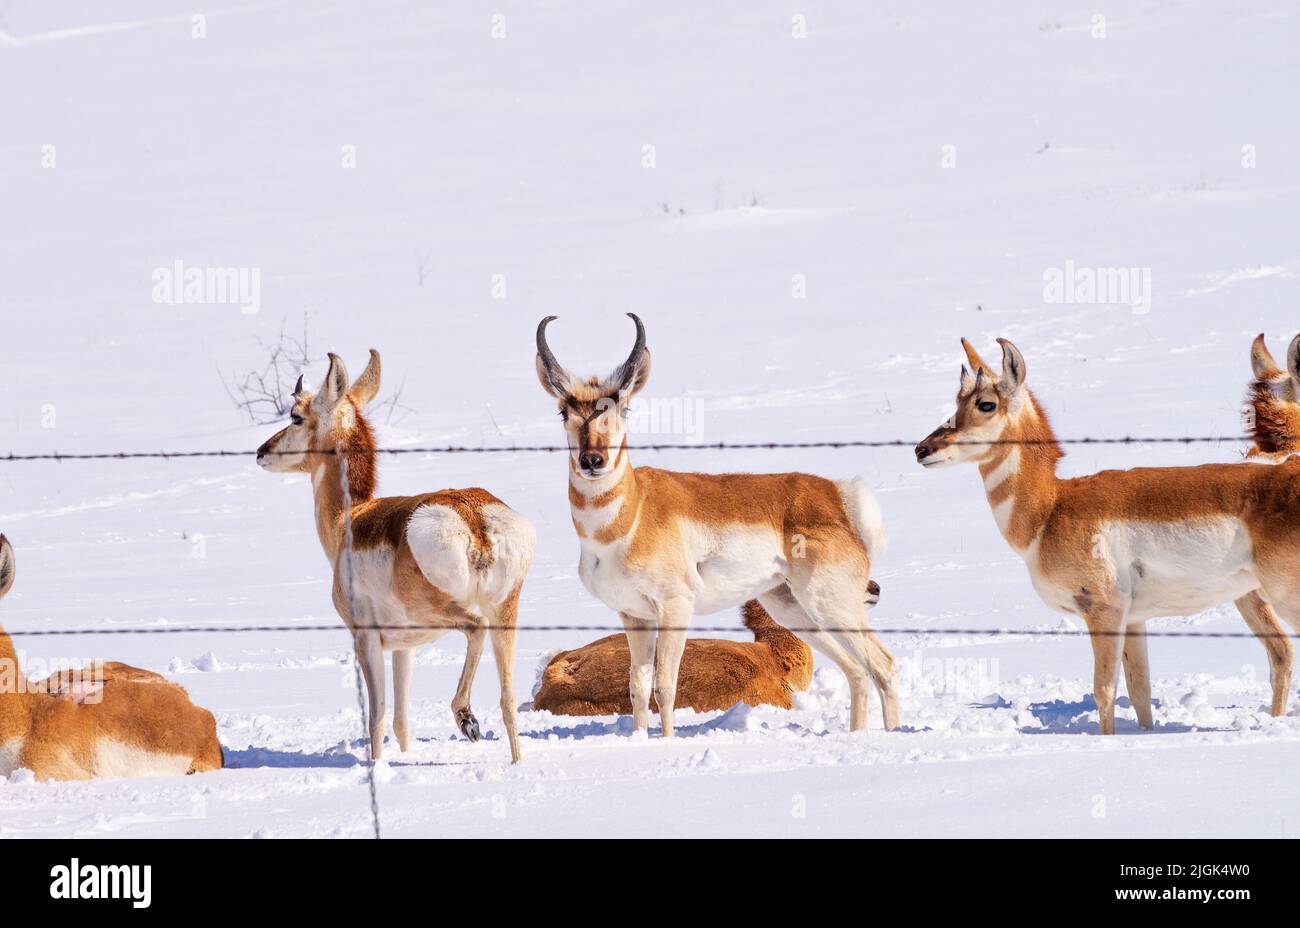 Pronghorn antelope stop along a fence in ranch lands in the grasslands in the foothills of the Santa Rita Mountains, north of Sonoita, Arizona, USA. A Stock Photo